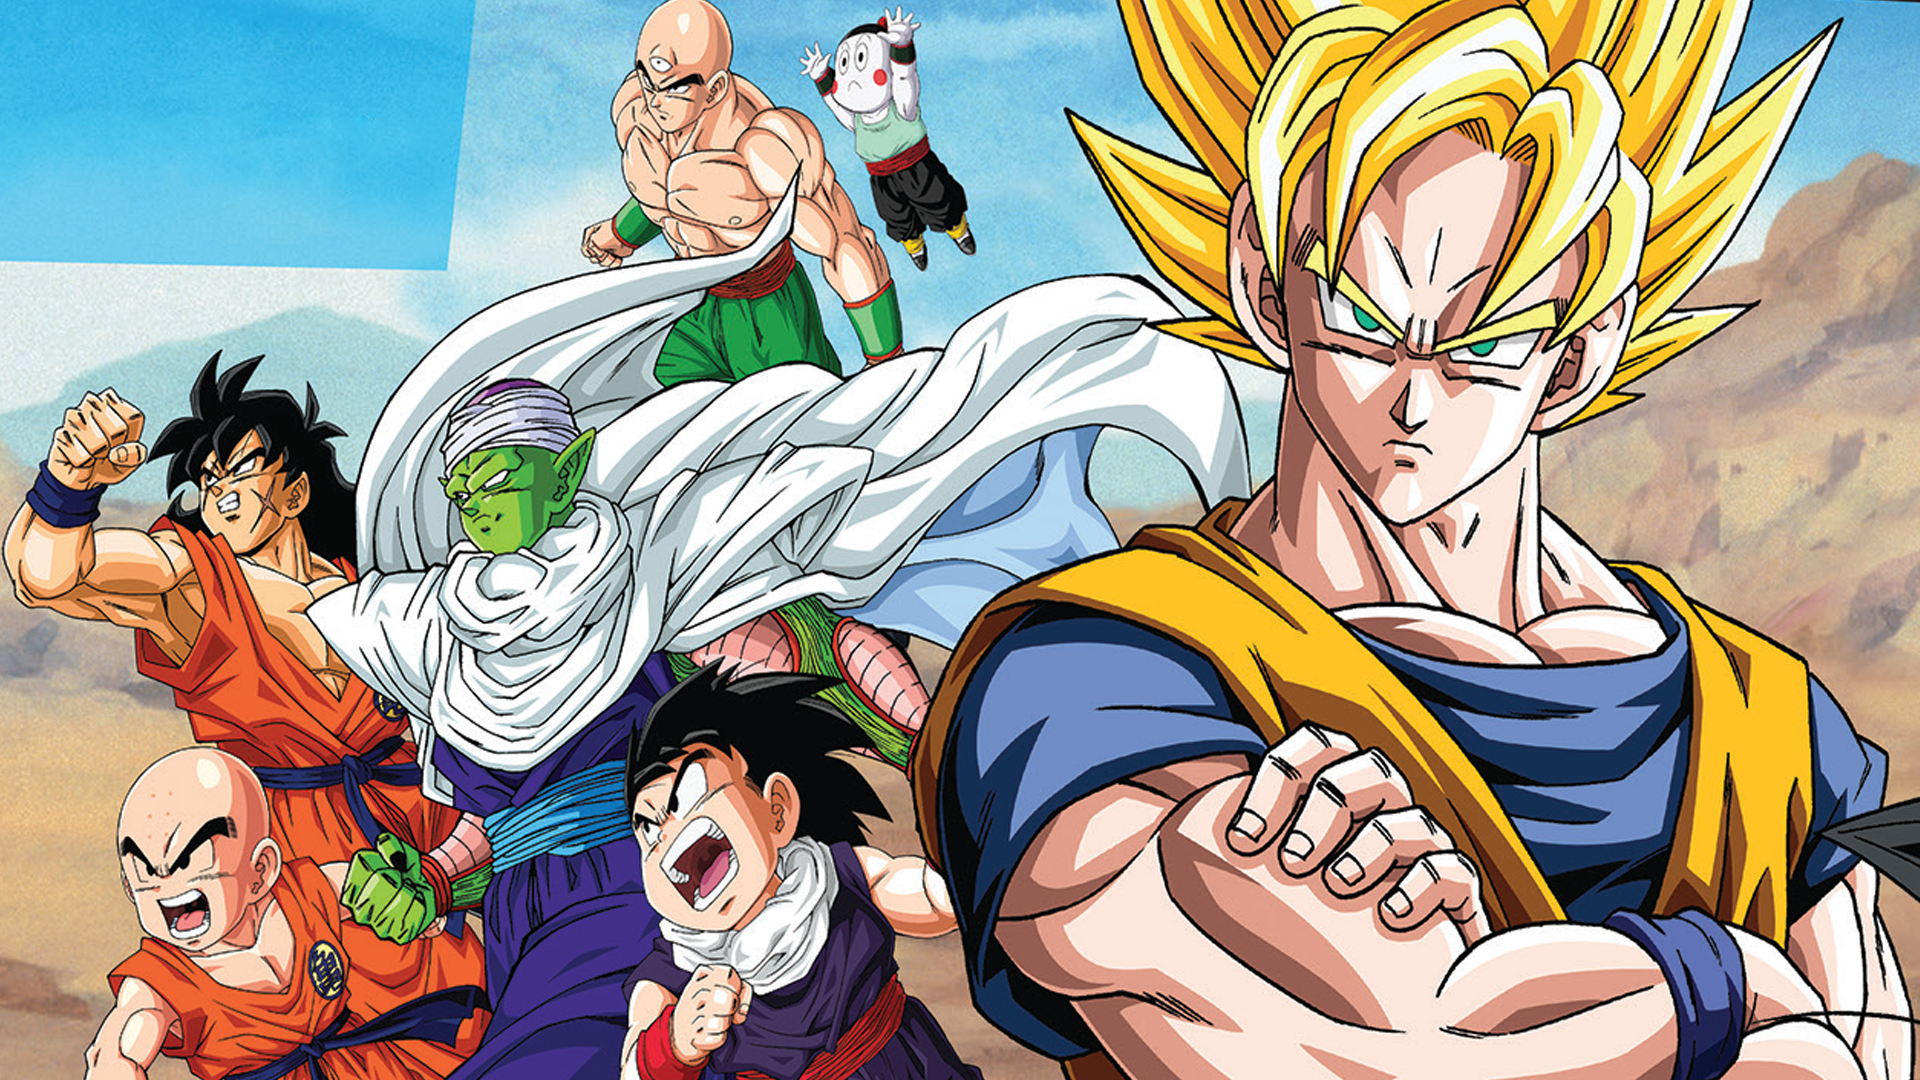 Dragonball Super Season 2 is near Release Date  What will it be about